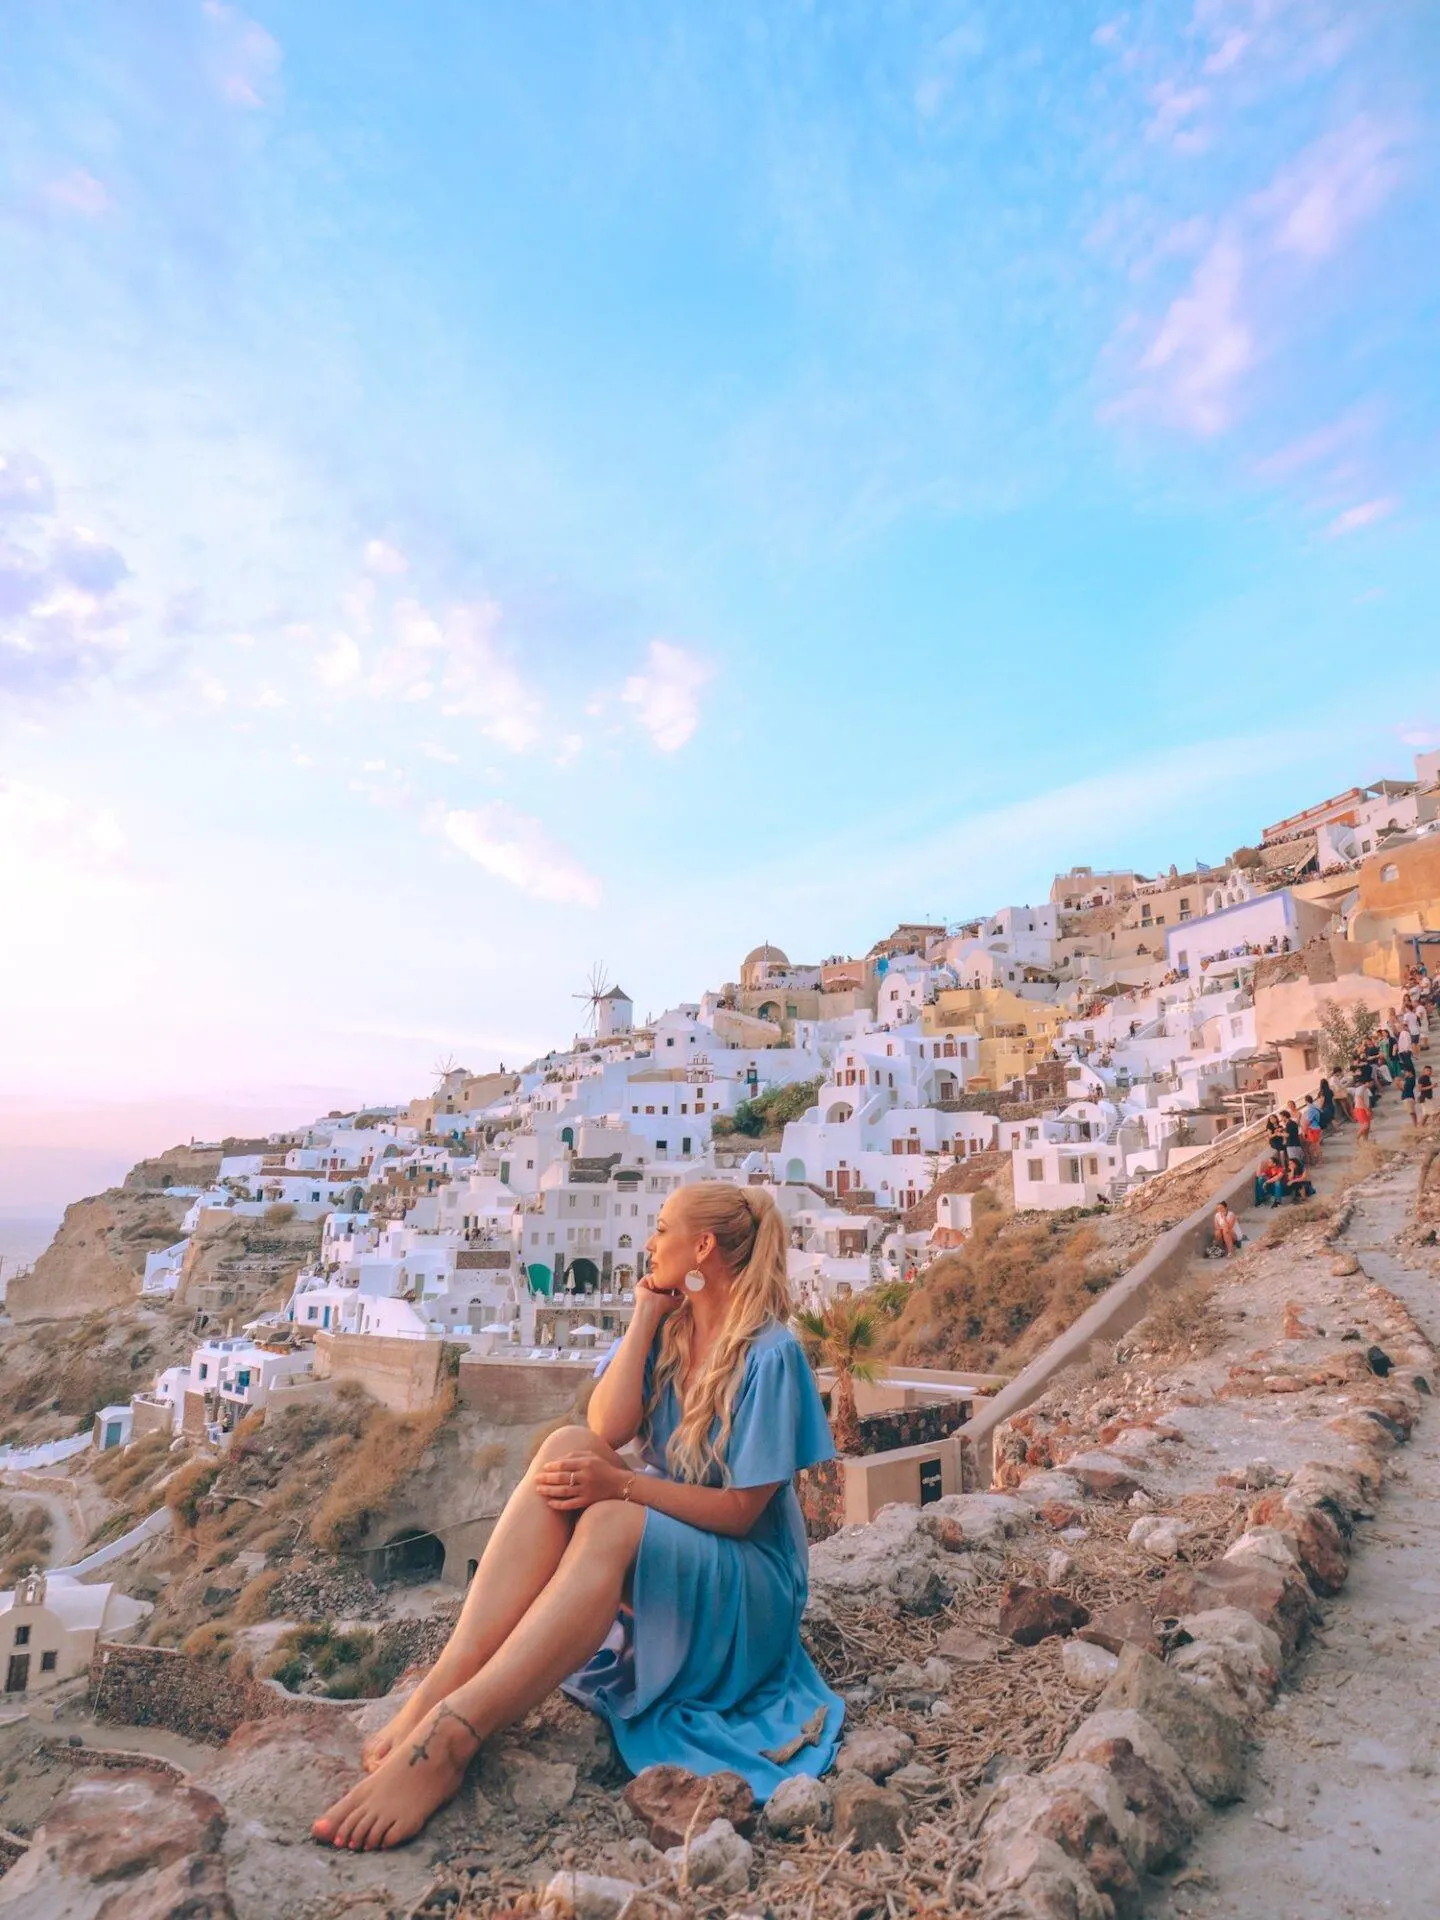 Dying to visit Santorini but think it's the kind of trip that's lavishly expensive? Visiting Santorini on a budget is completely possible and I'm here to tell you how! From flight and hotel bookings to dining and activity recommendations, read this guide to find out exactly how you can visit Santorini on a budget. Pictured here: Catching the sunset in Oia at Byzantine Castle Ruins